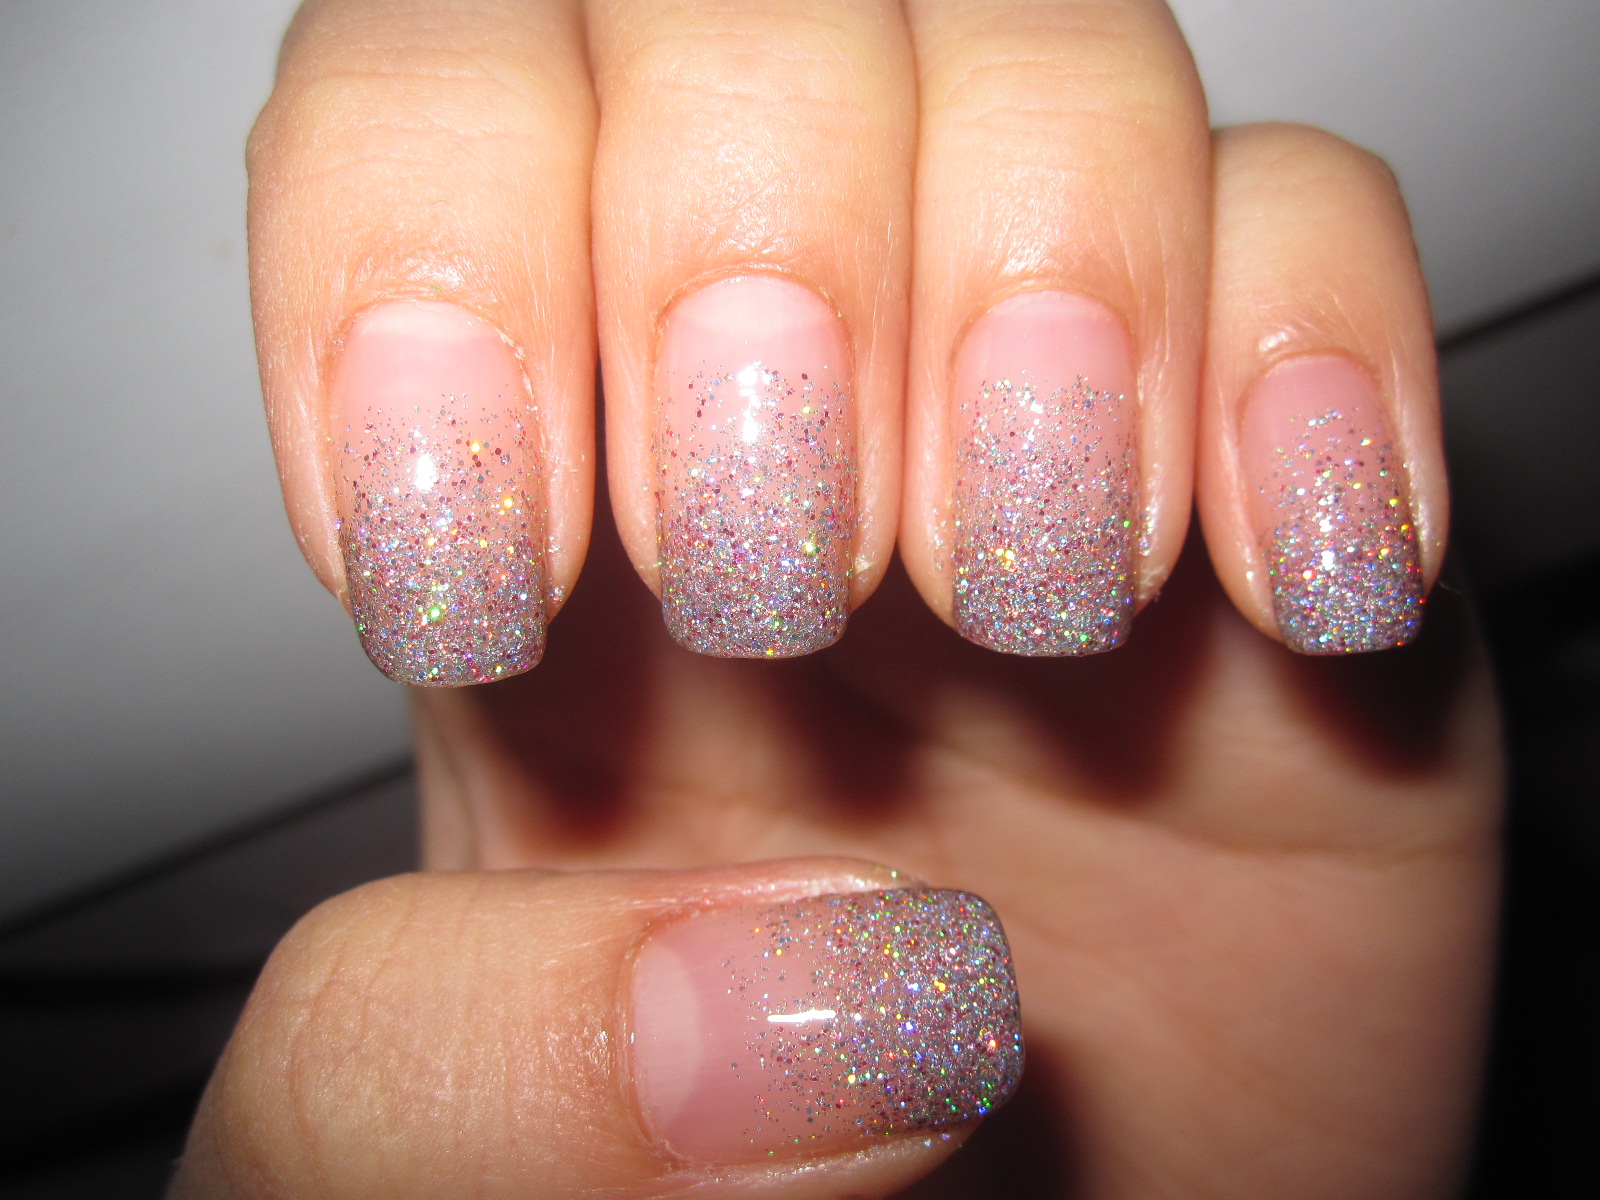 8. "Glittery Summer Nail Designs with Sparkly Nail Polish" - wide 9